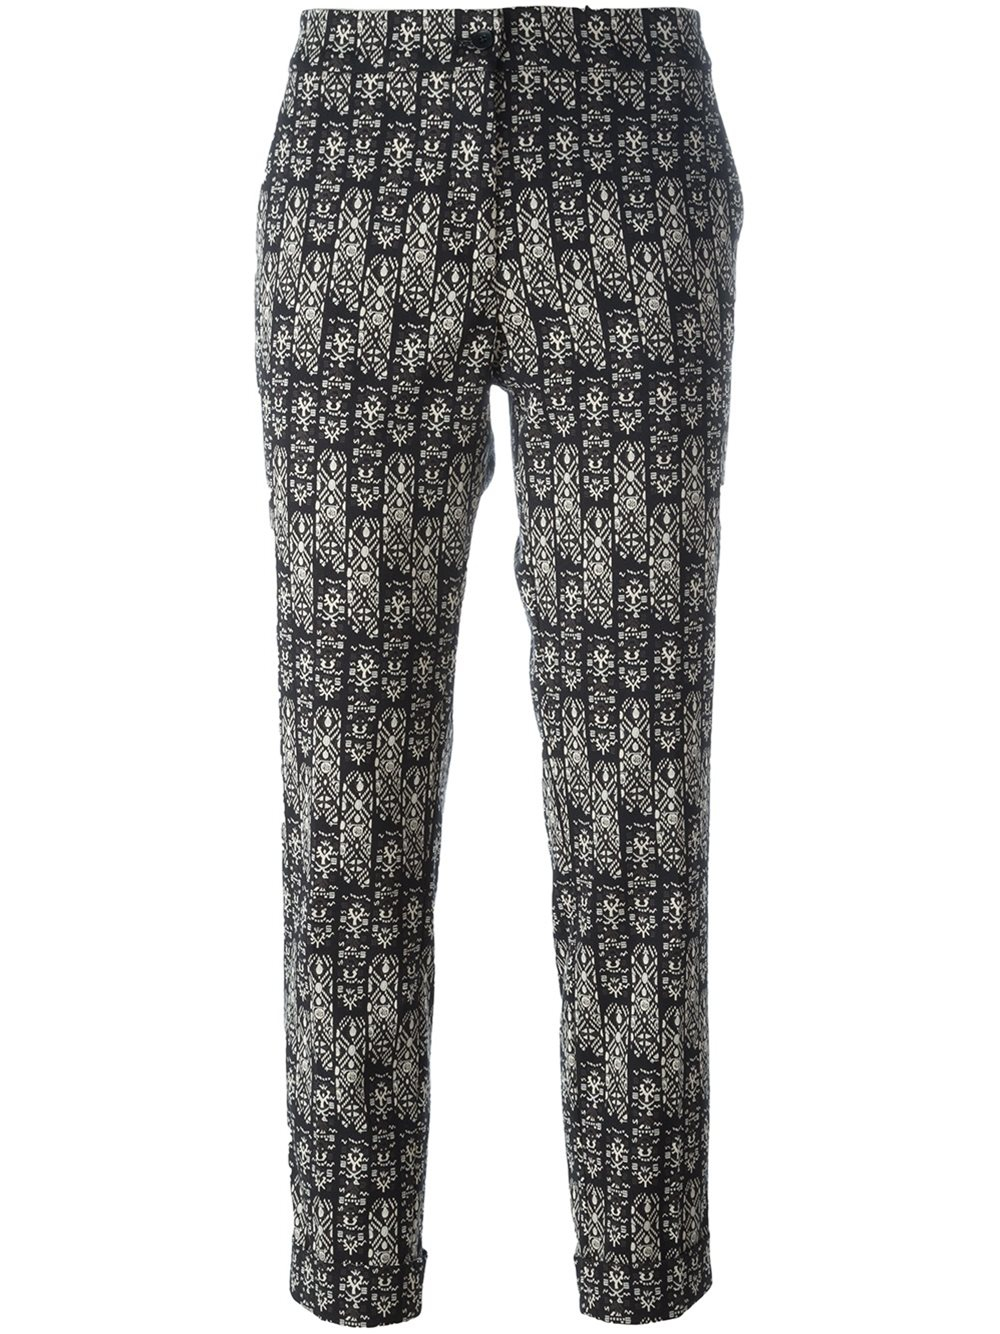 Etro Printed Cropped Trousers in Black | Lyst